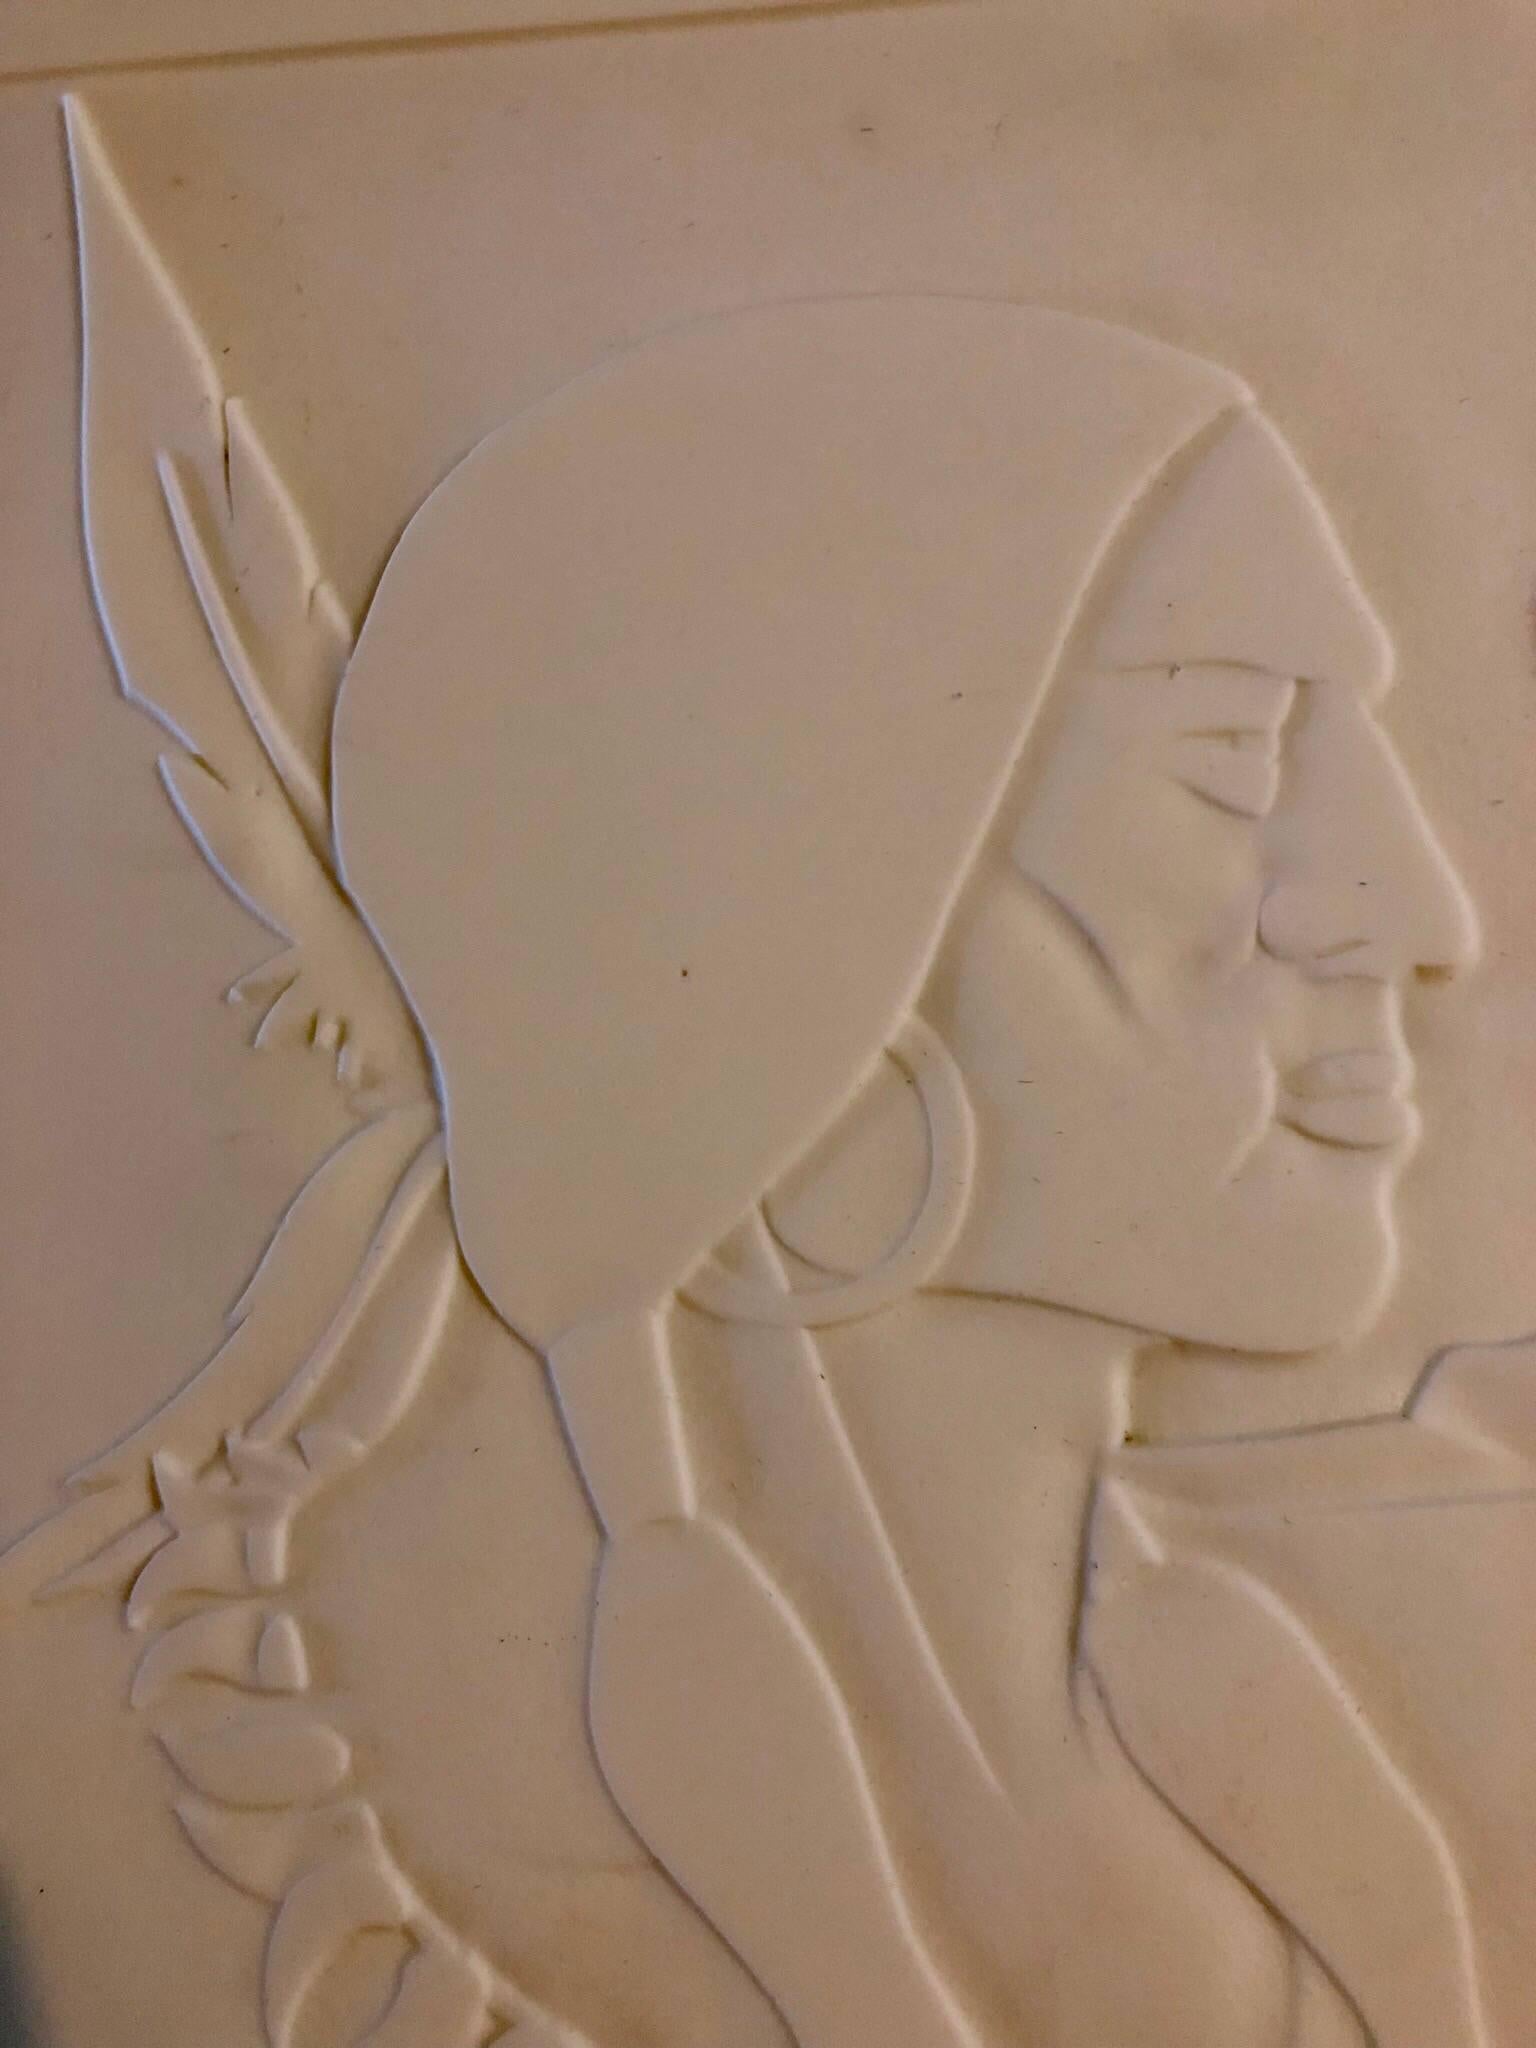 This is a carved glass panel. I belive this is milk glass. it is a classic Americana scene of a cowboy or frontier trapper and an Indian or Native American with a feathered headdress. 

Abraham Harriton was a Romanian-born Jewish modernist artist